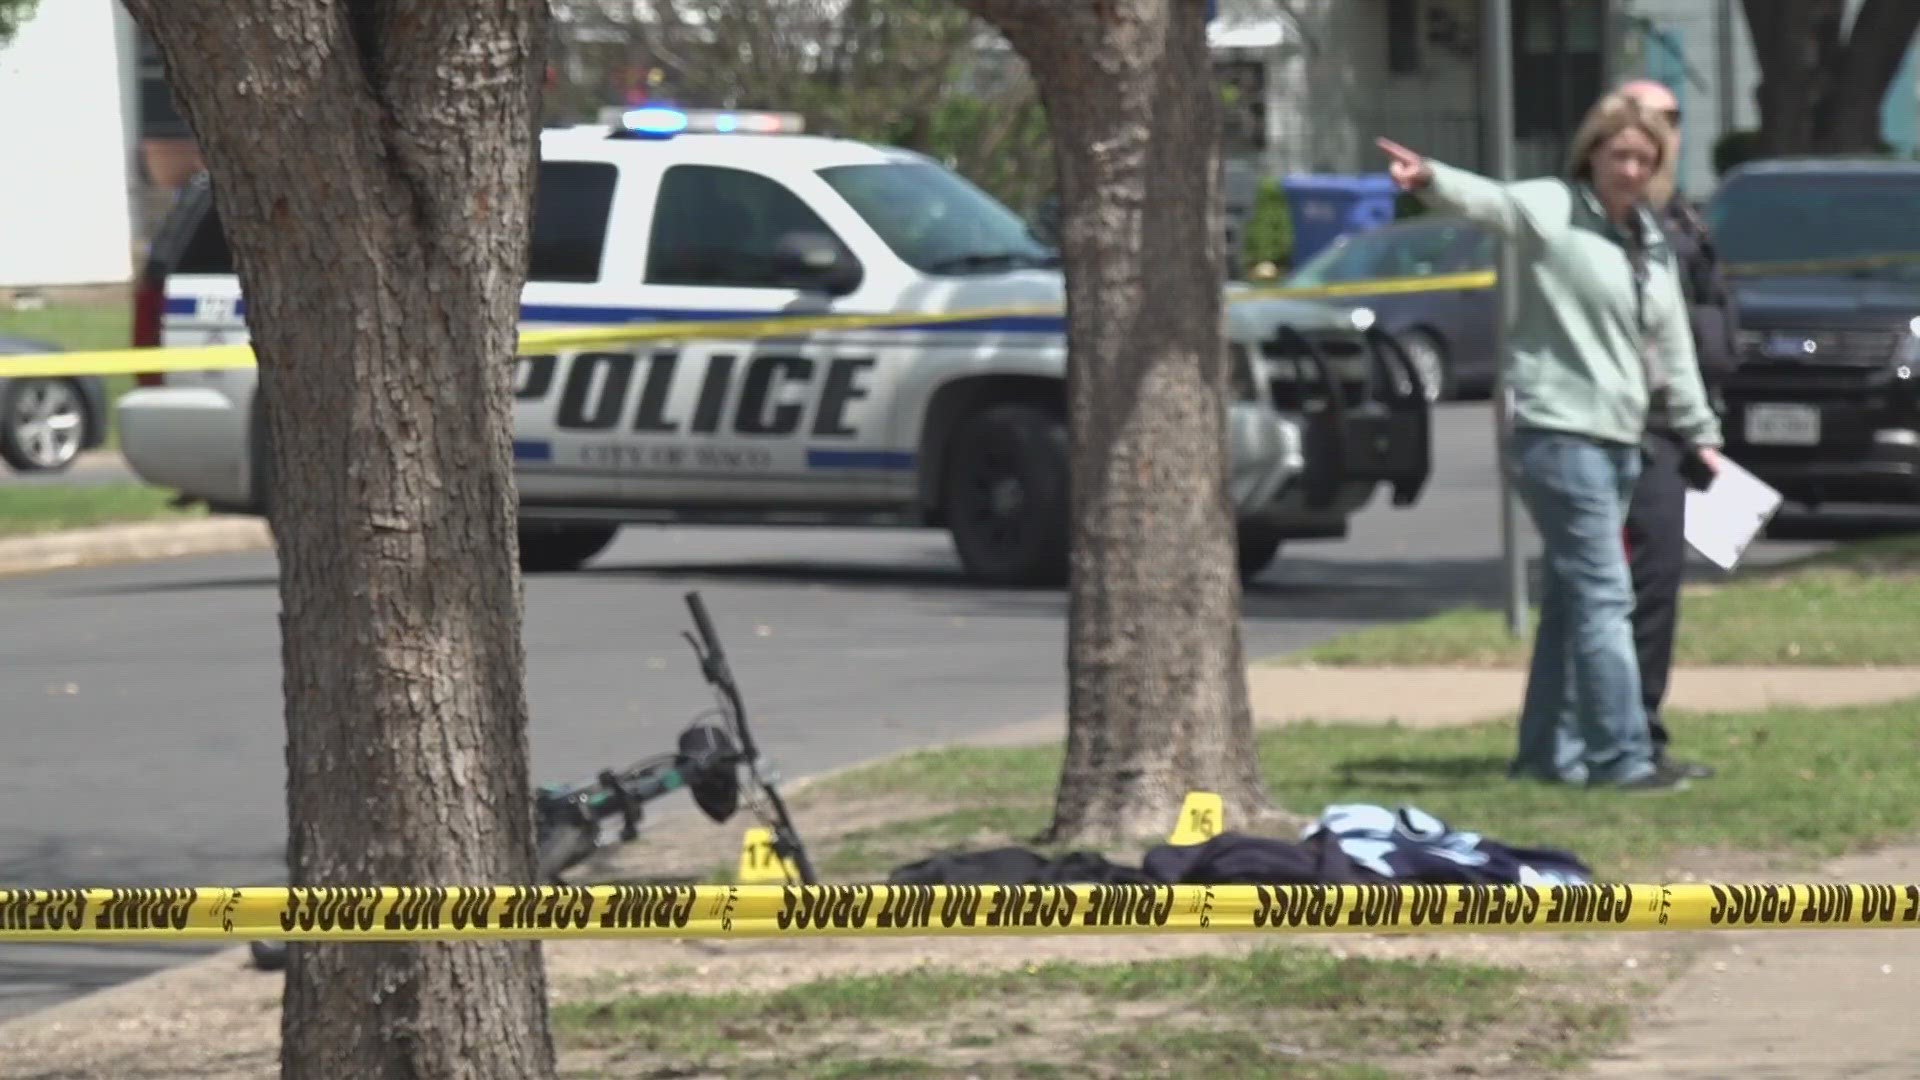 The victim was shot and killed in the middle of the day in a Waco neighborhood.